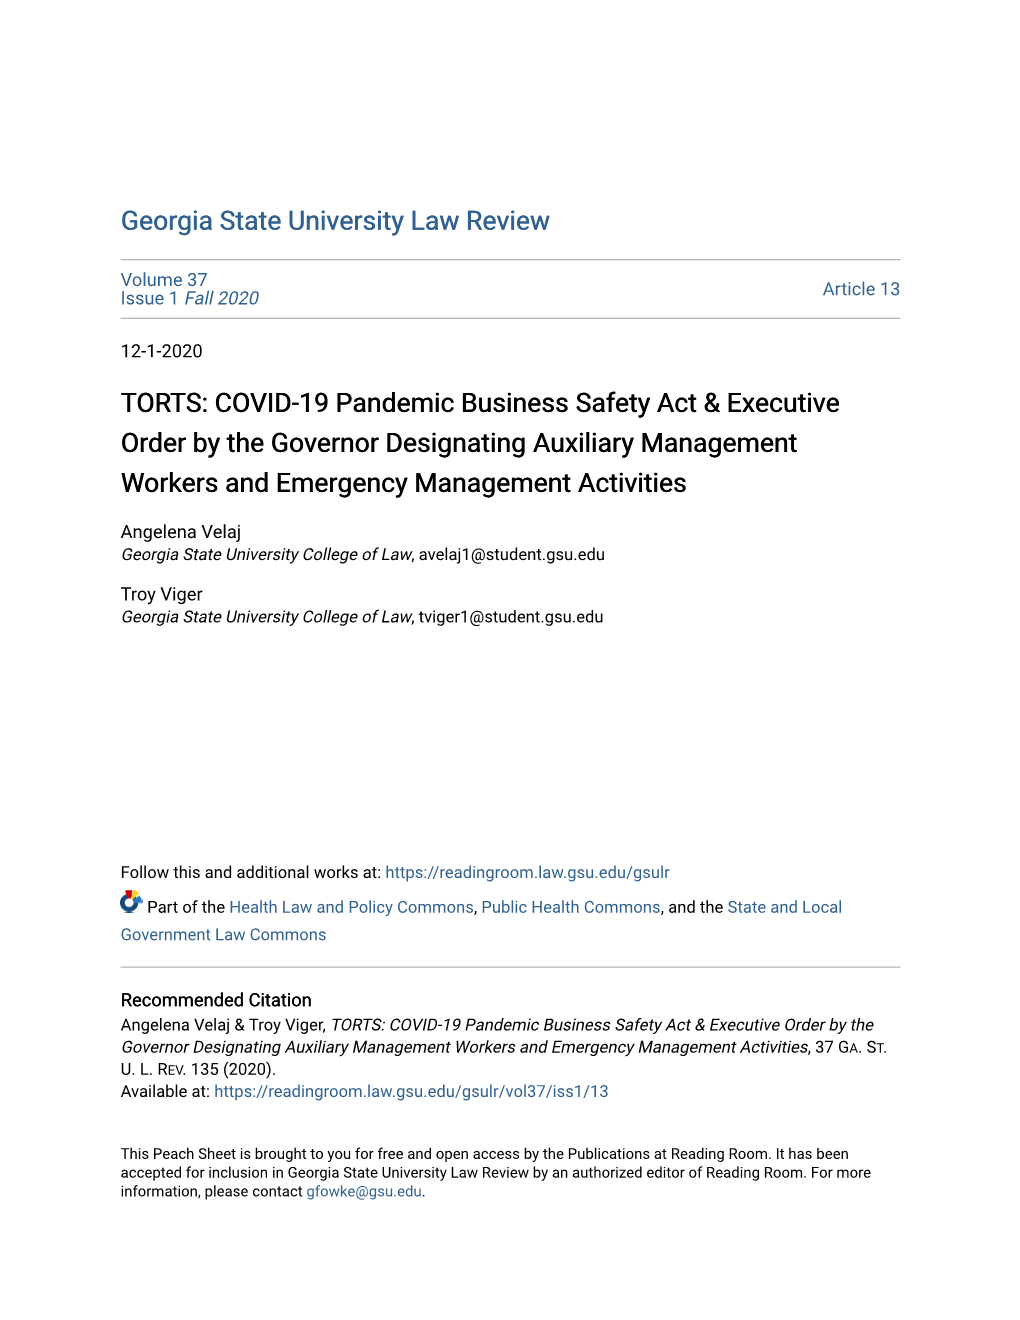 TORTS: COVID-19 Pandemic Business Safety Act & Executive